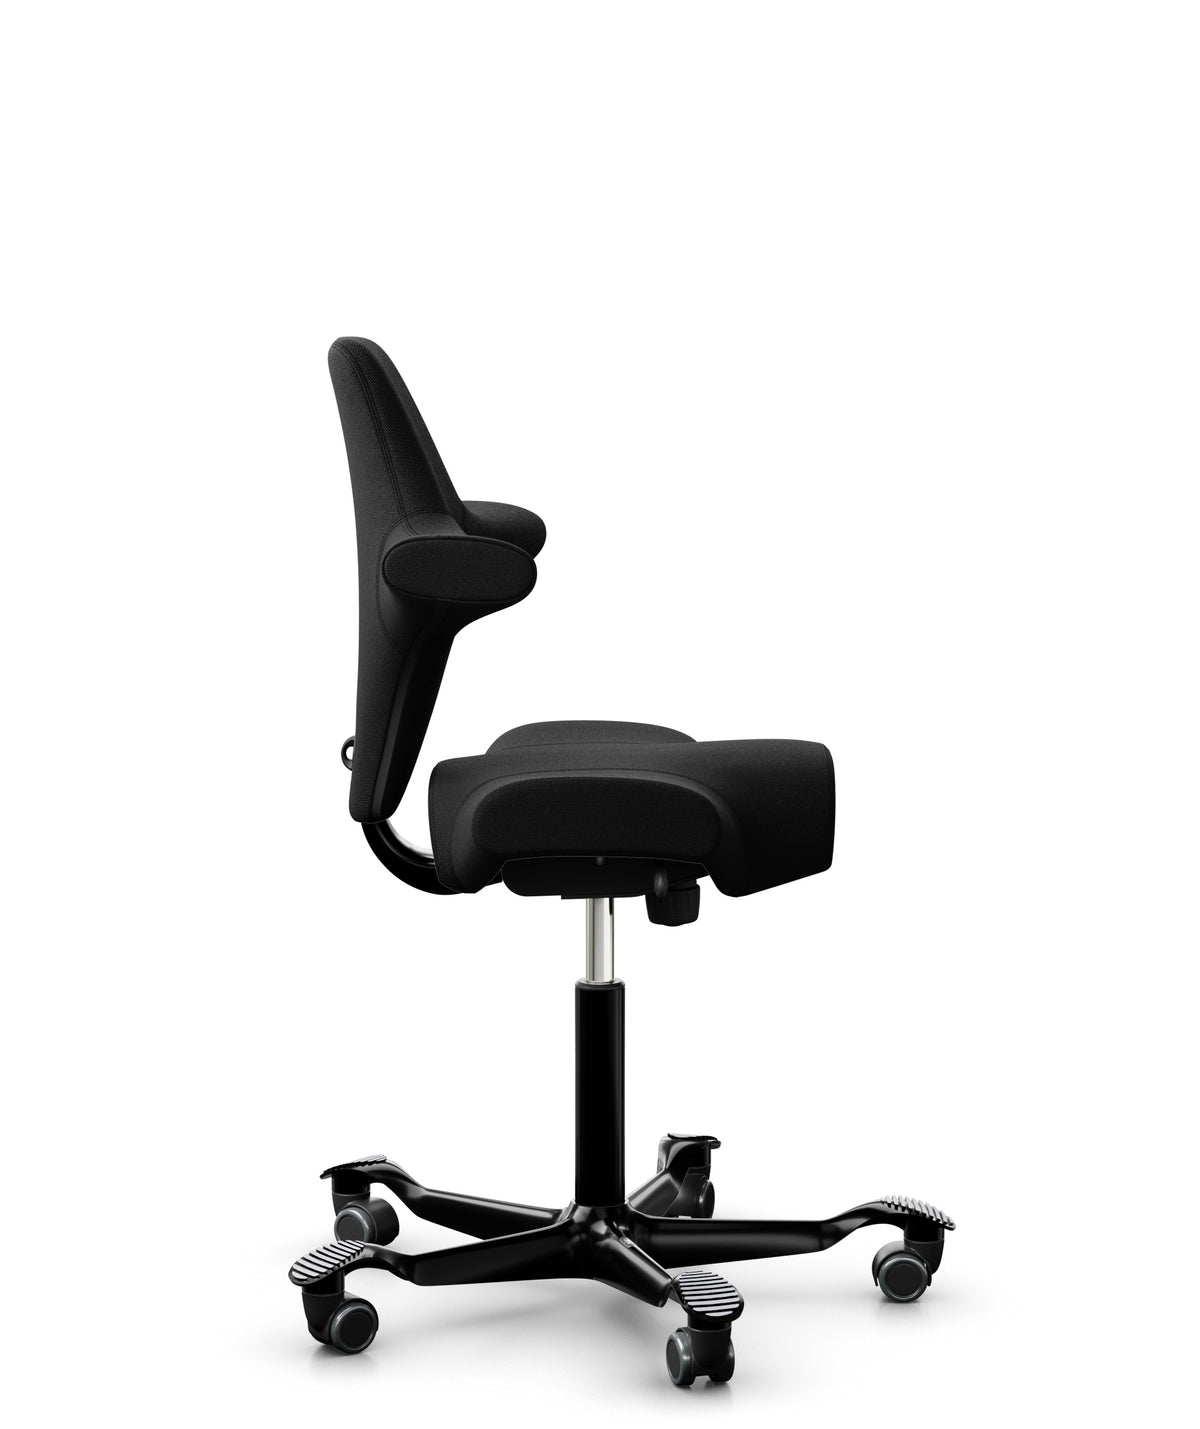 HÅG Capisco 8106 Ergonomic Office Chair with Optional High Seat and Footring Black